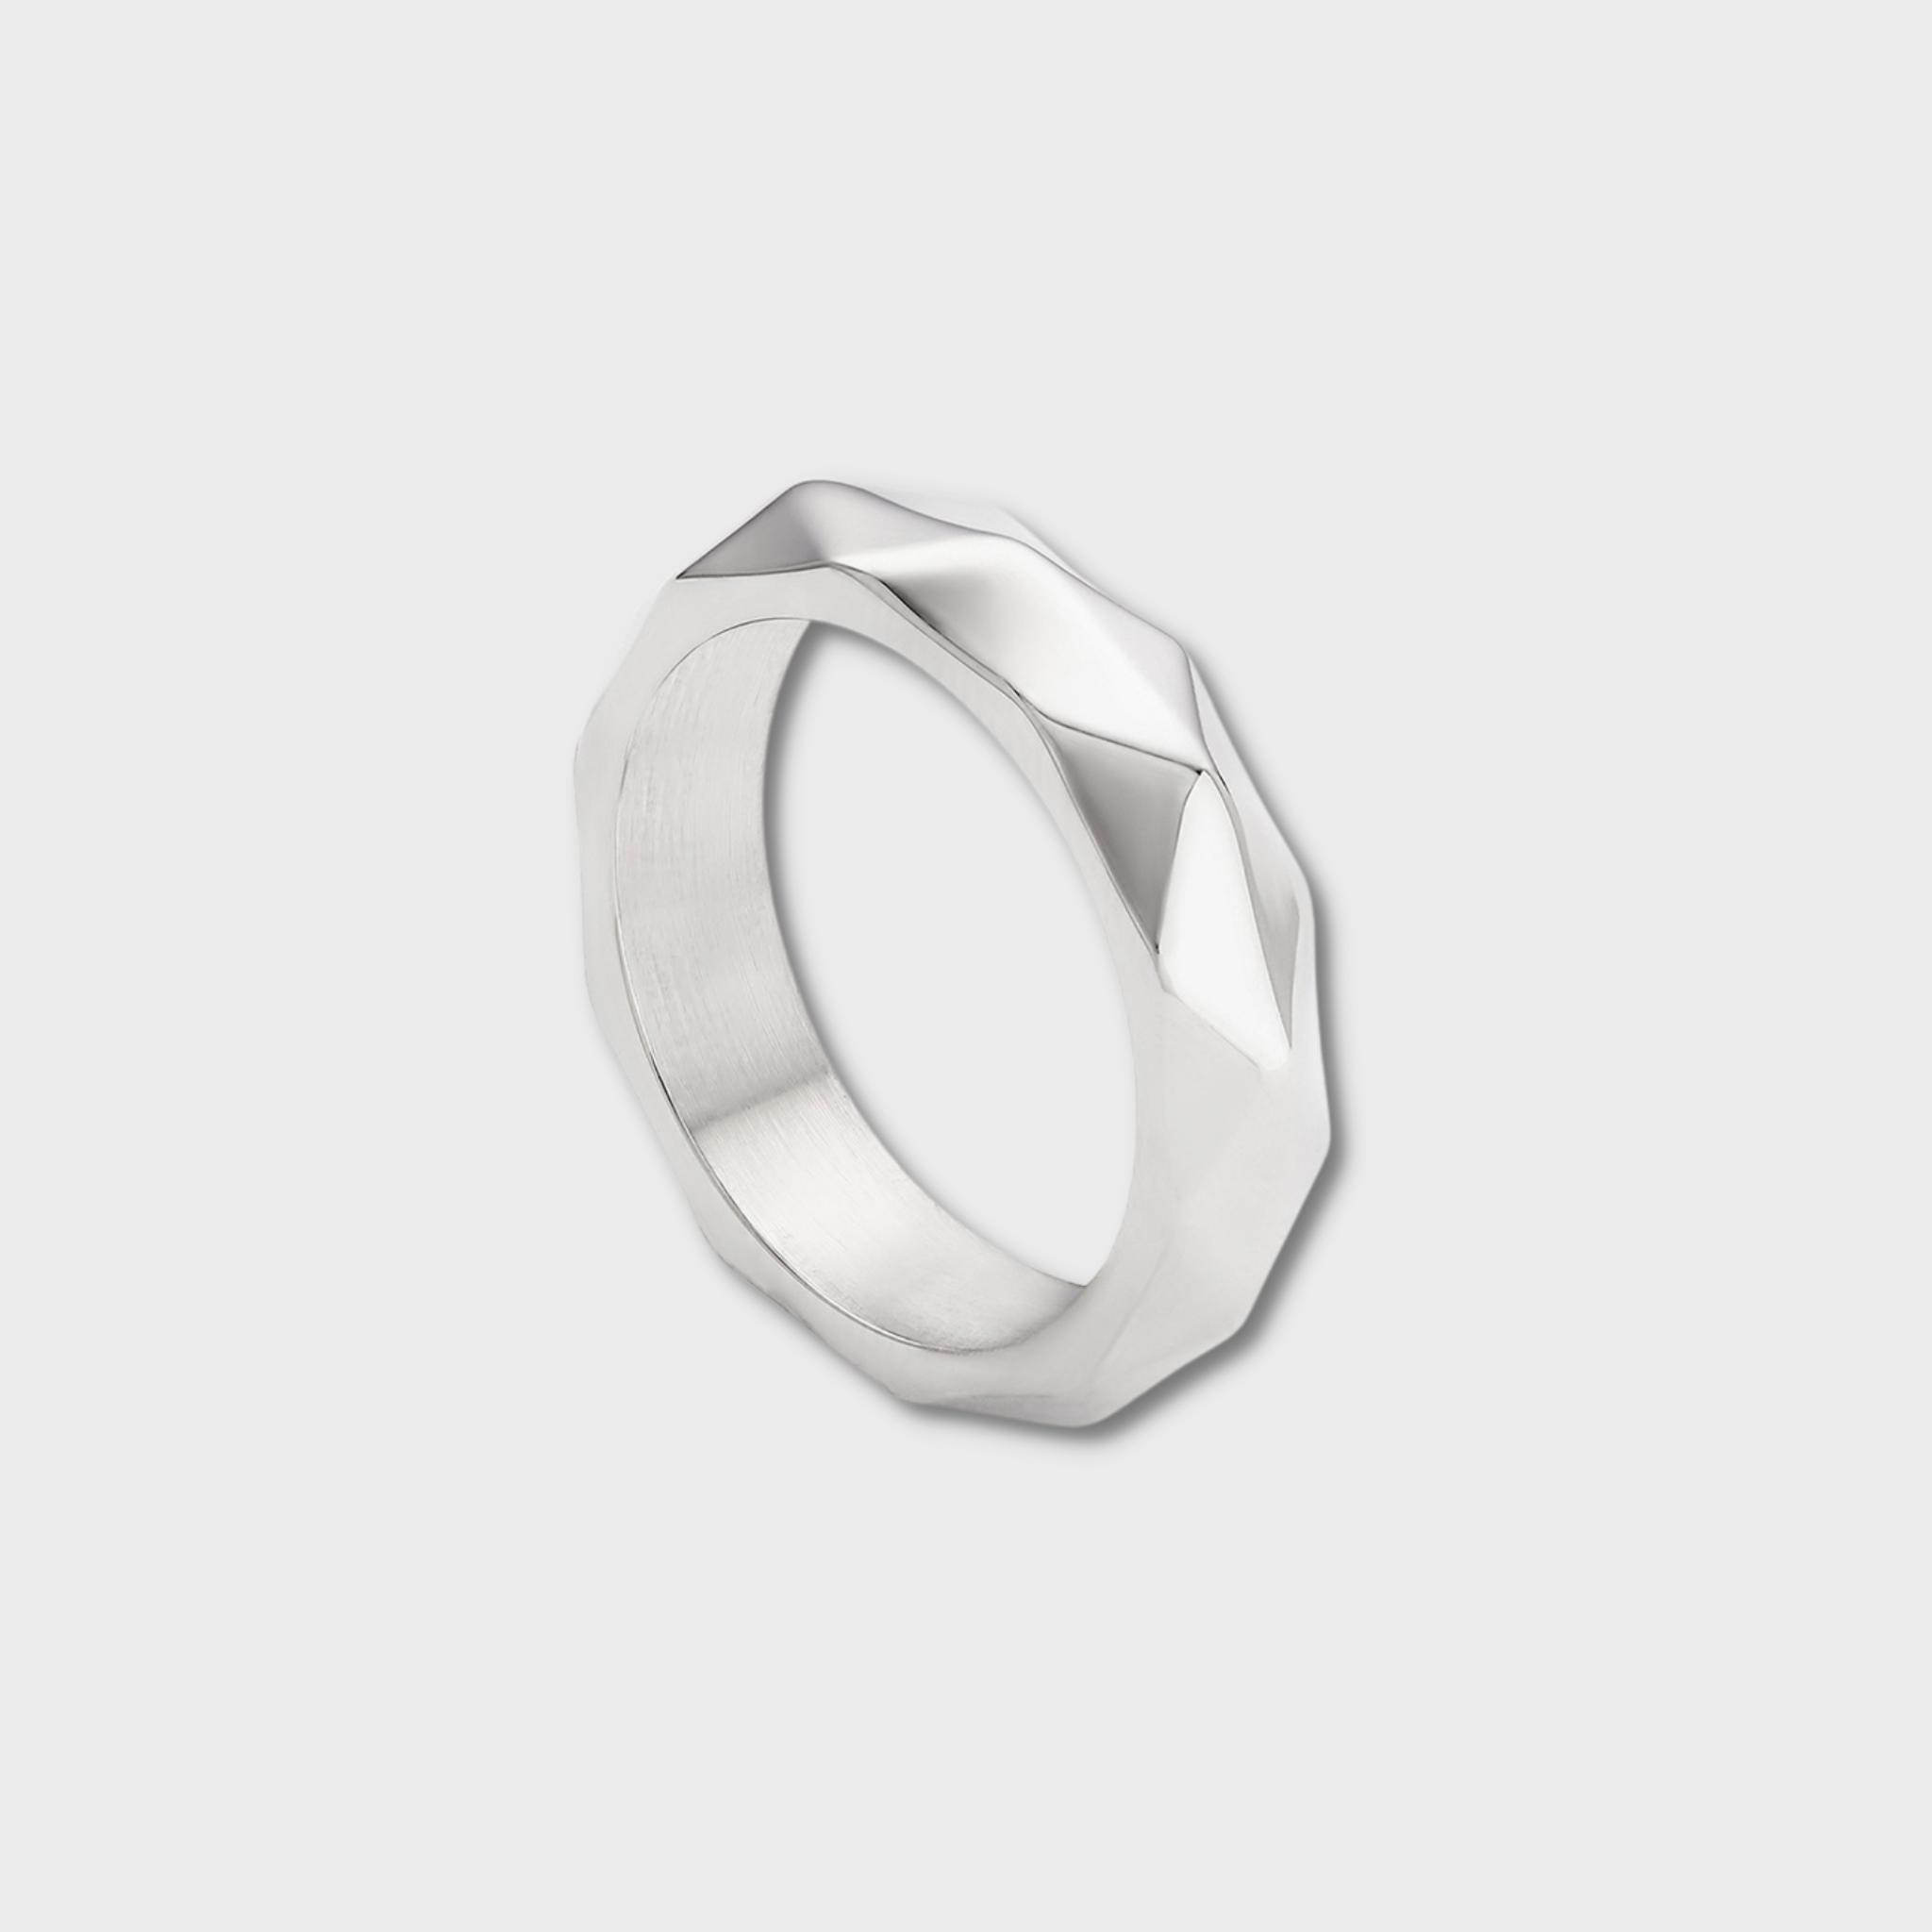 Stainless Steel Geometric Shaped Ring